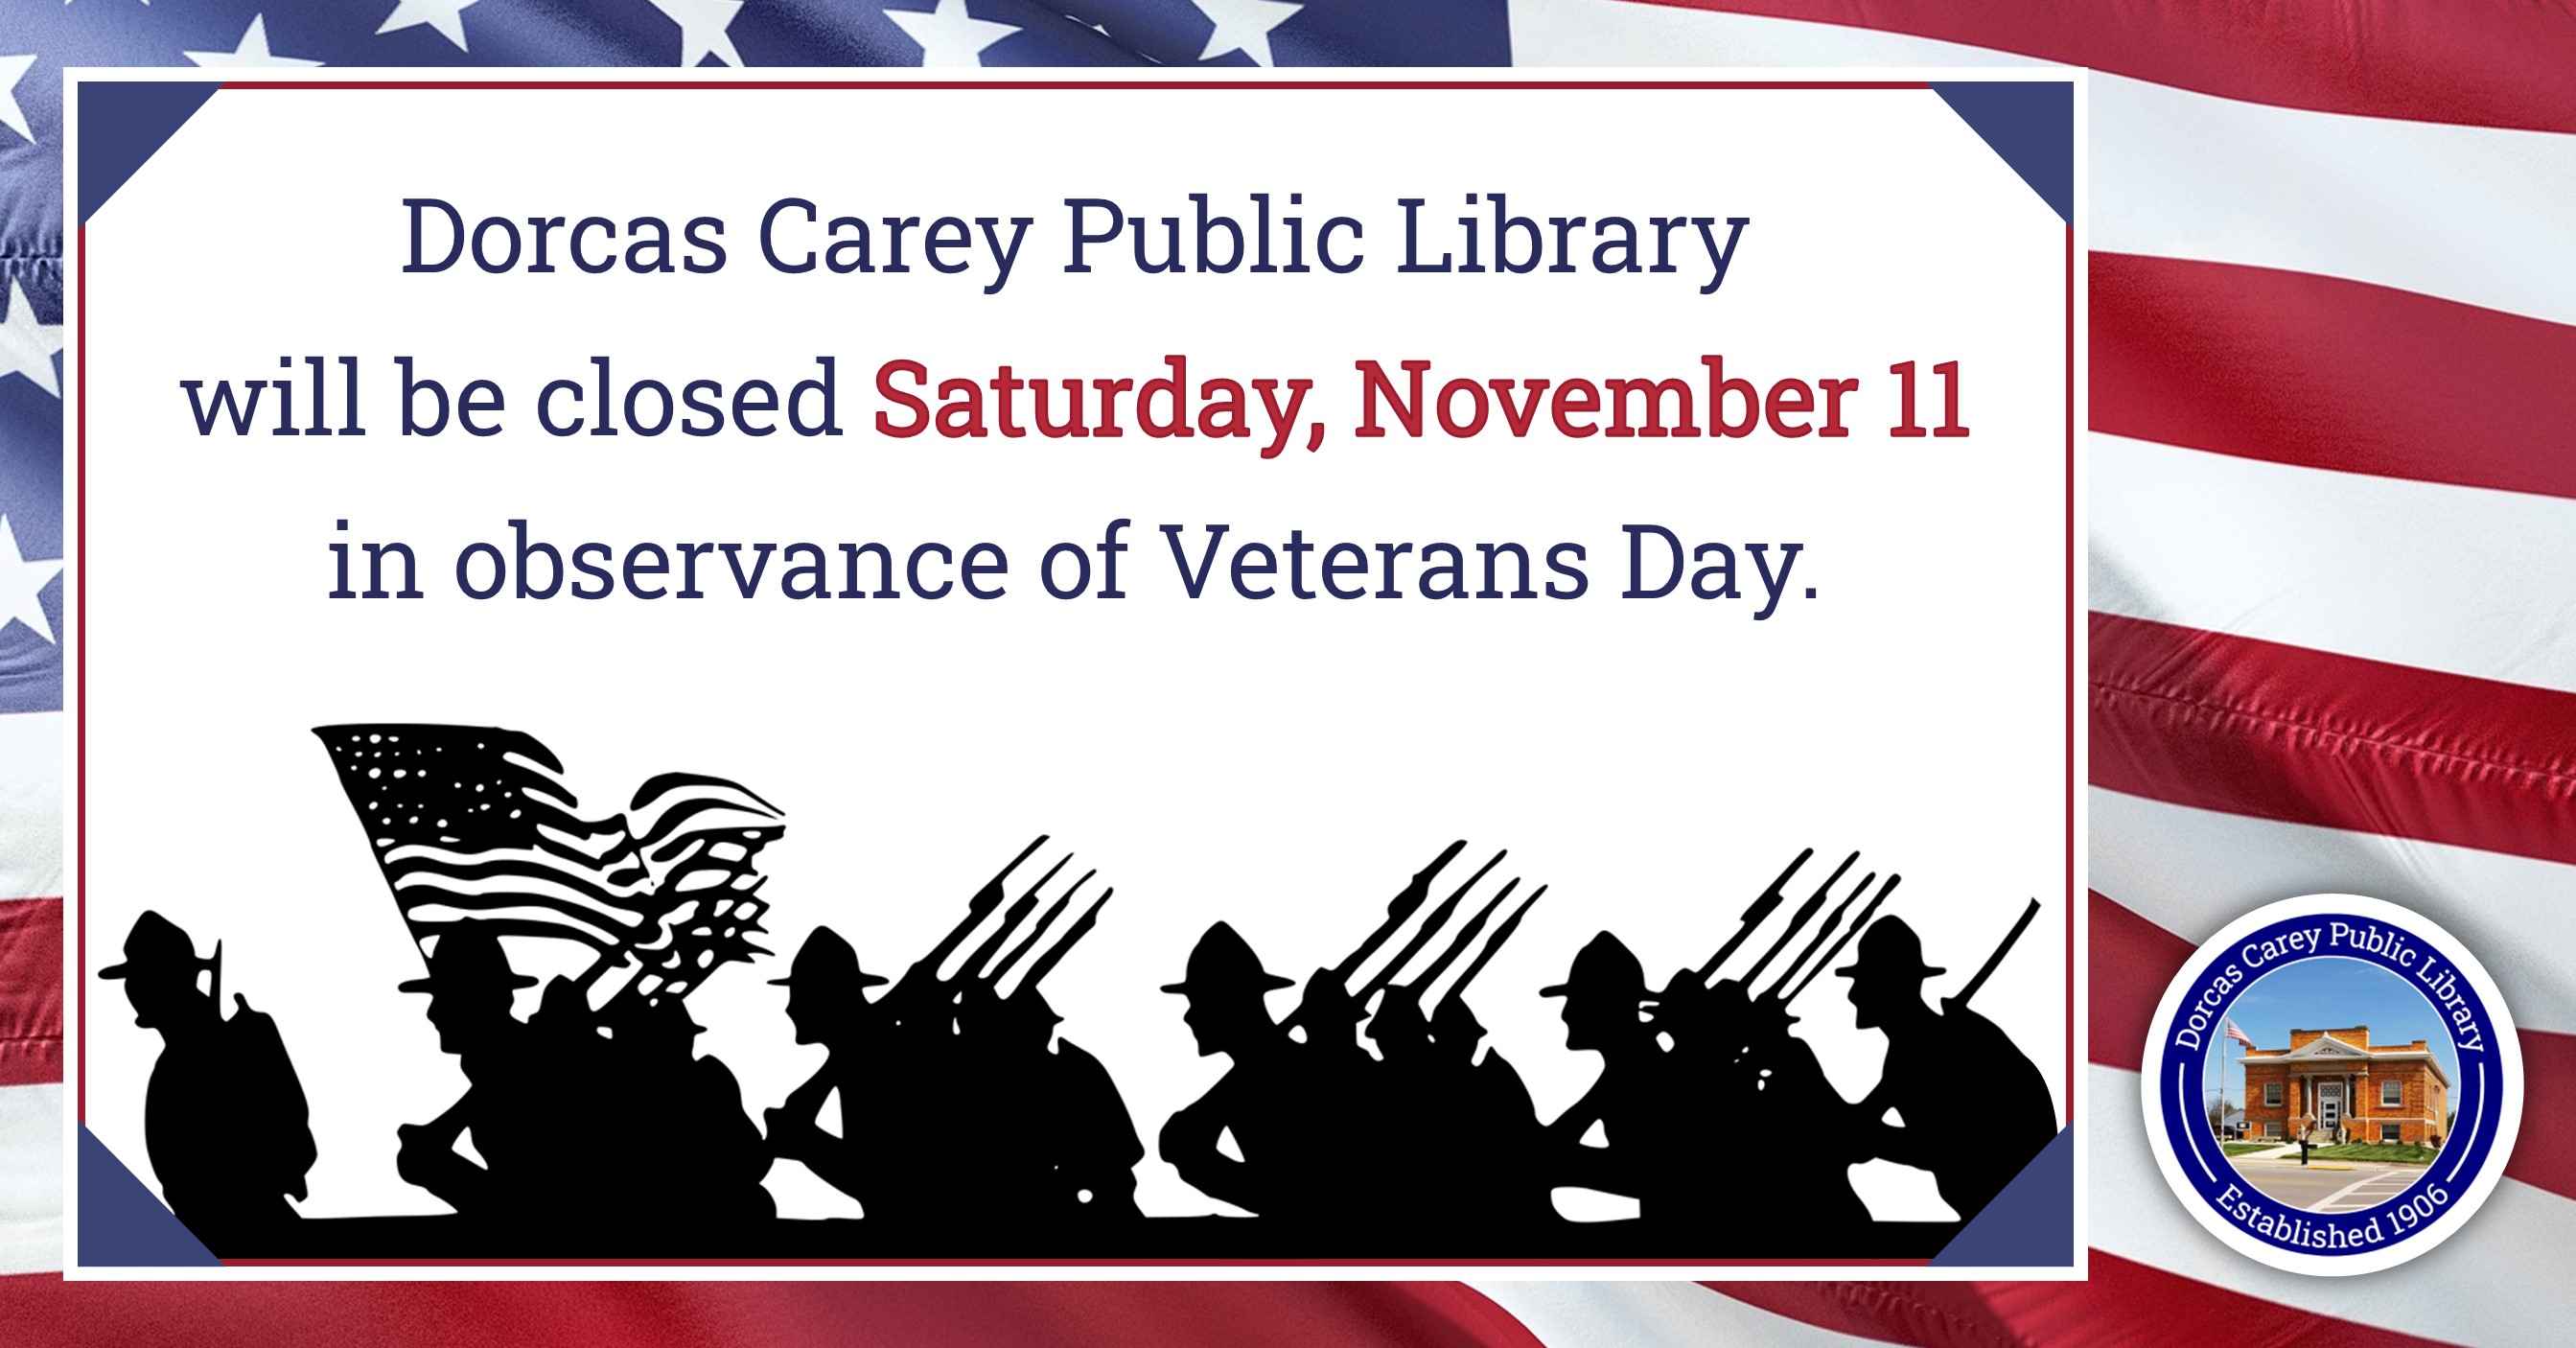 The library will be closed on Saturday, November 11th in observance of Columbus Day and will resume regular business hours on Monday, November 13th at 9 a.m.  Visit us online at www.dorcascarey.org for your library needs.